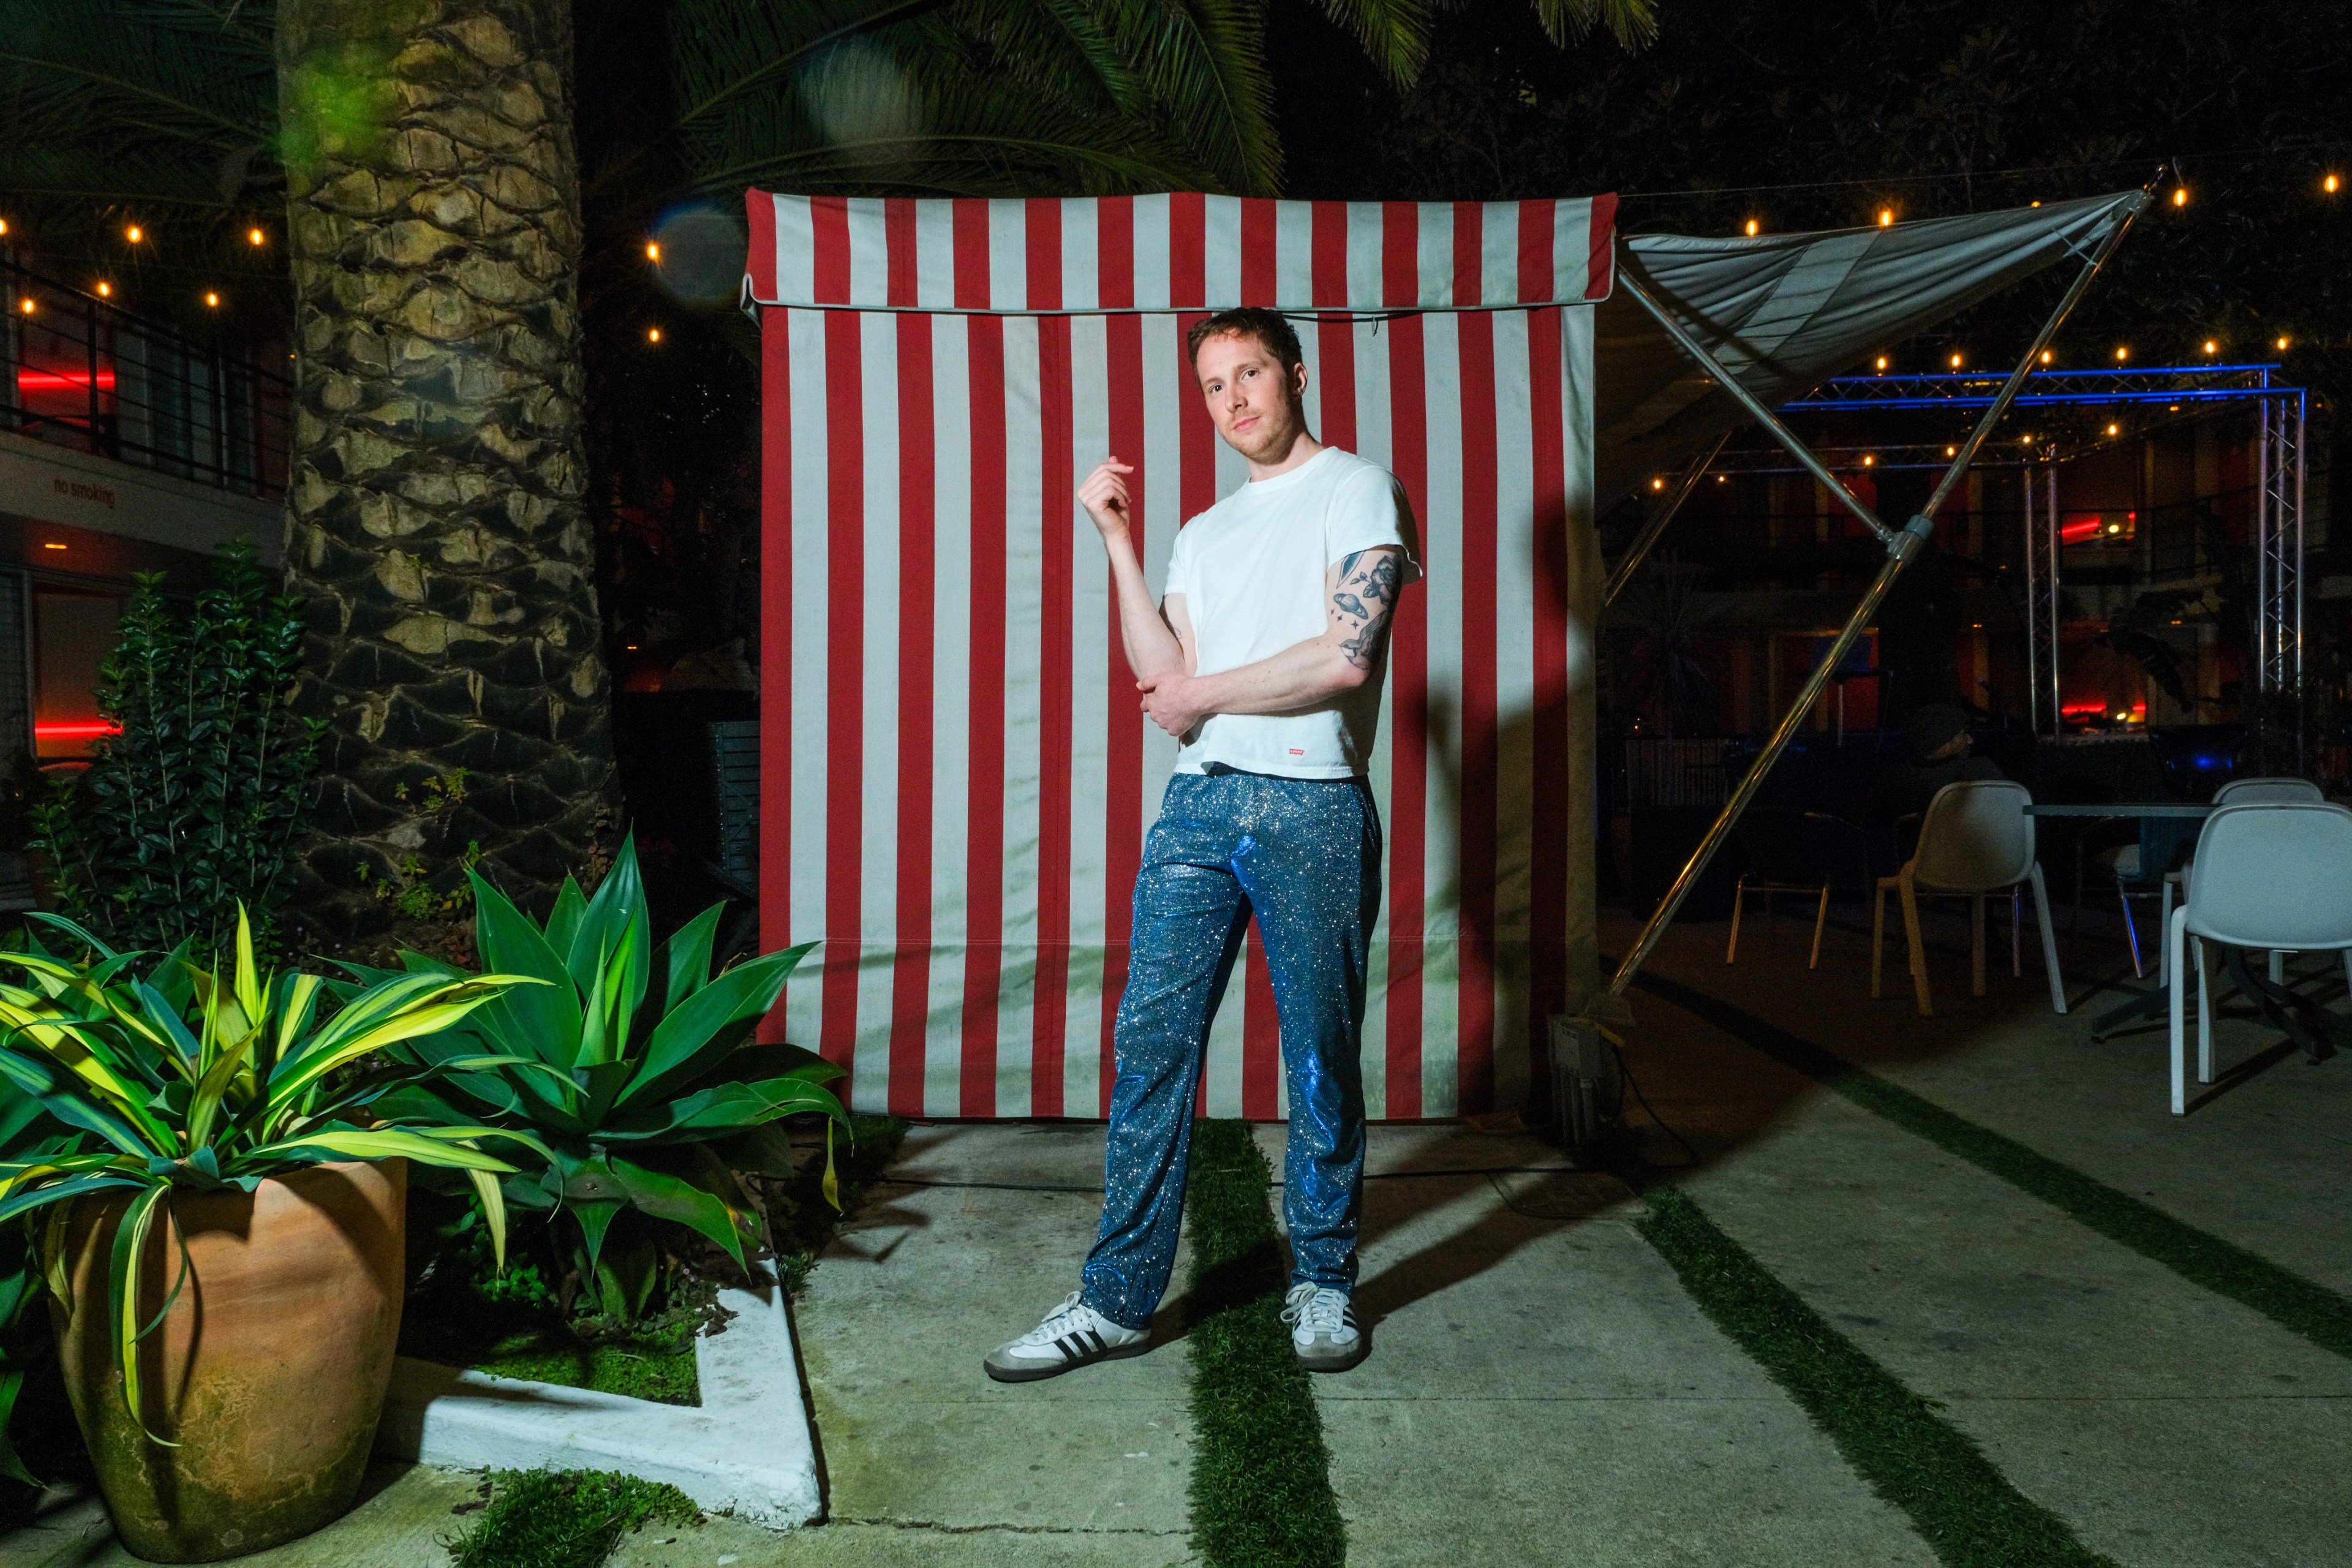 A man poses before a red-striped backdrop at a night event, sporting a white tee and patterned pants.